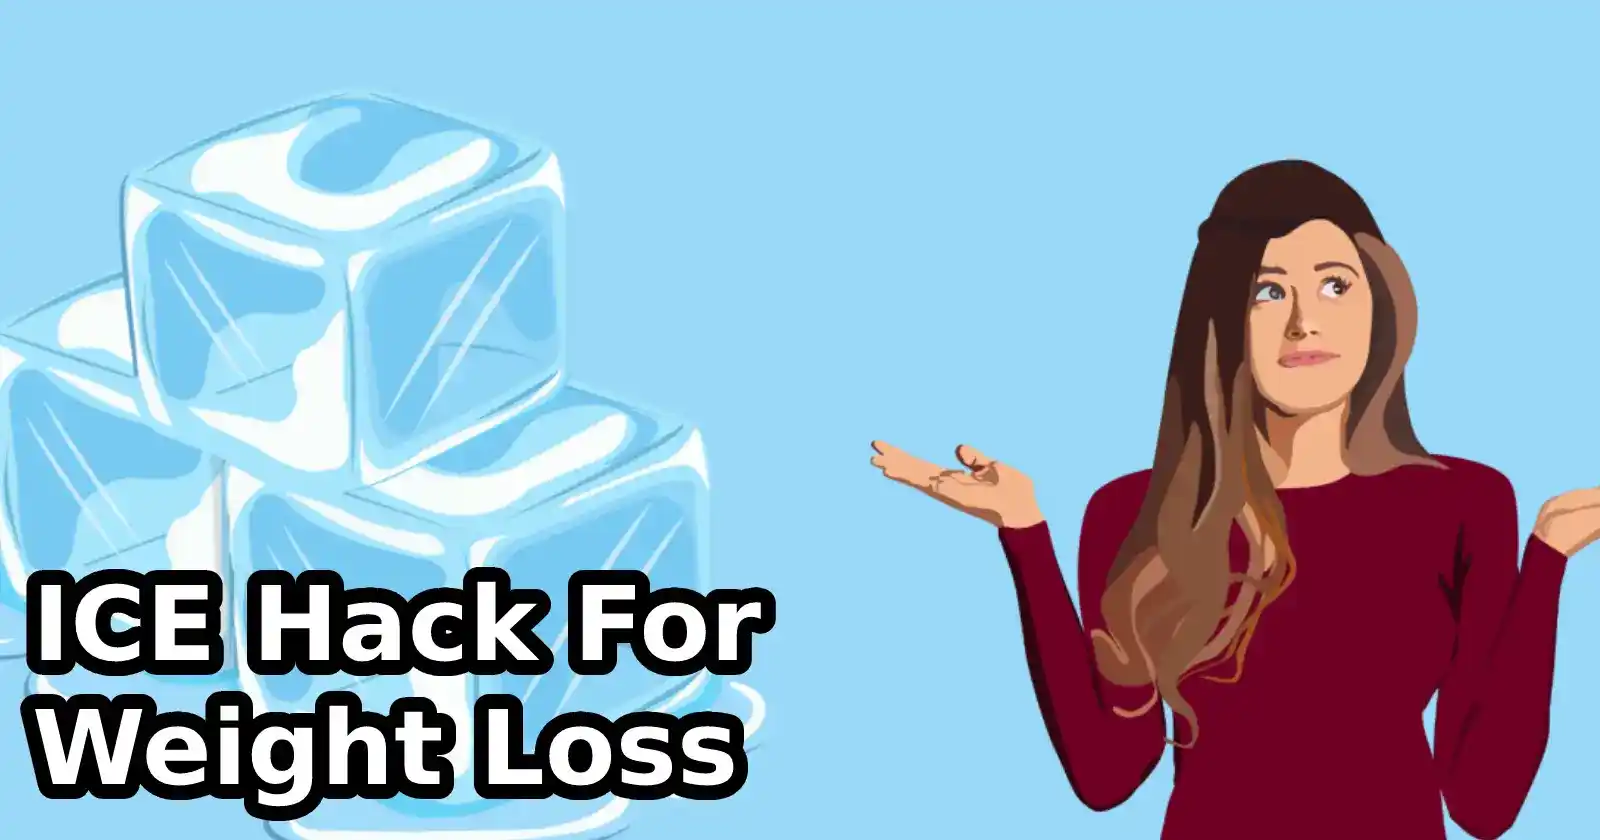 What is the ICE Hack For Weight Loss